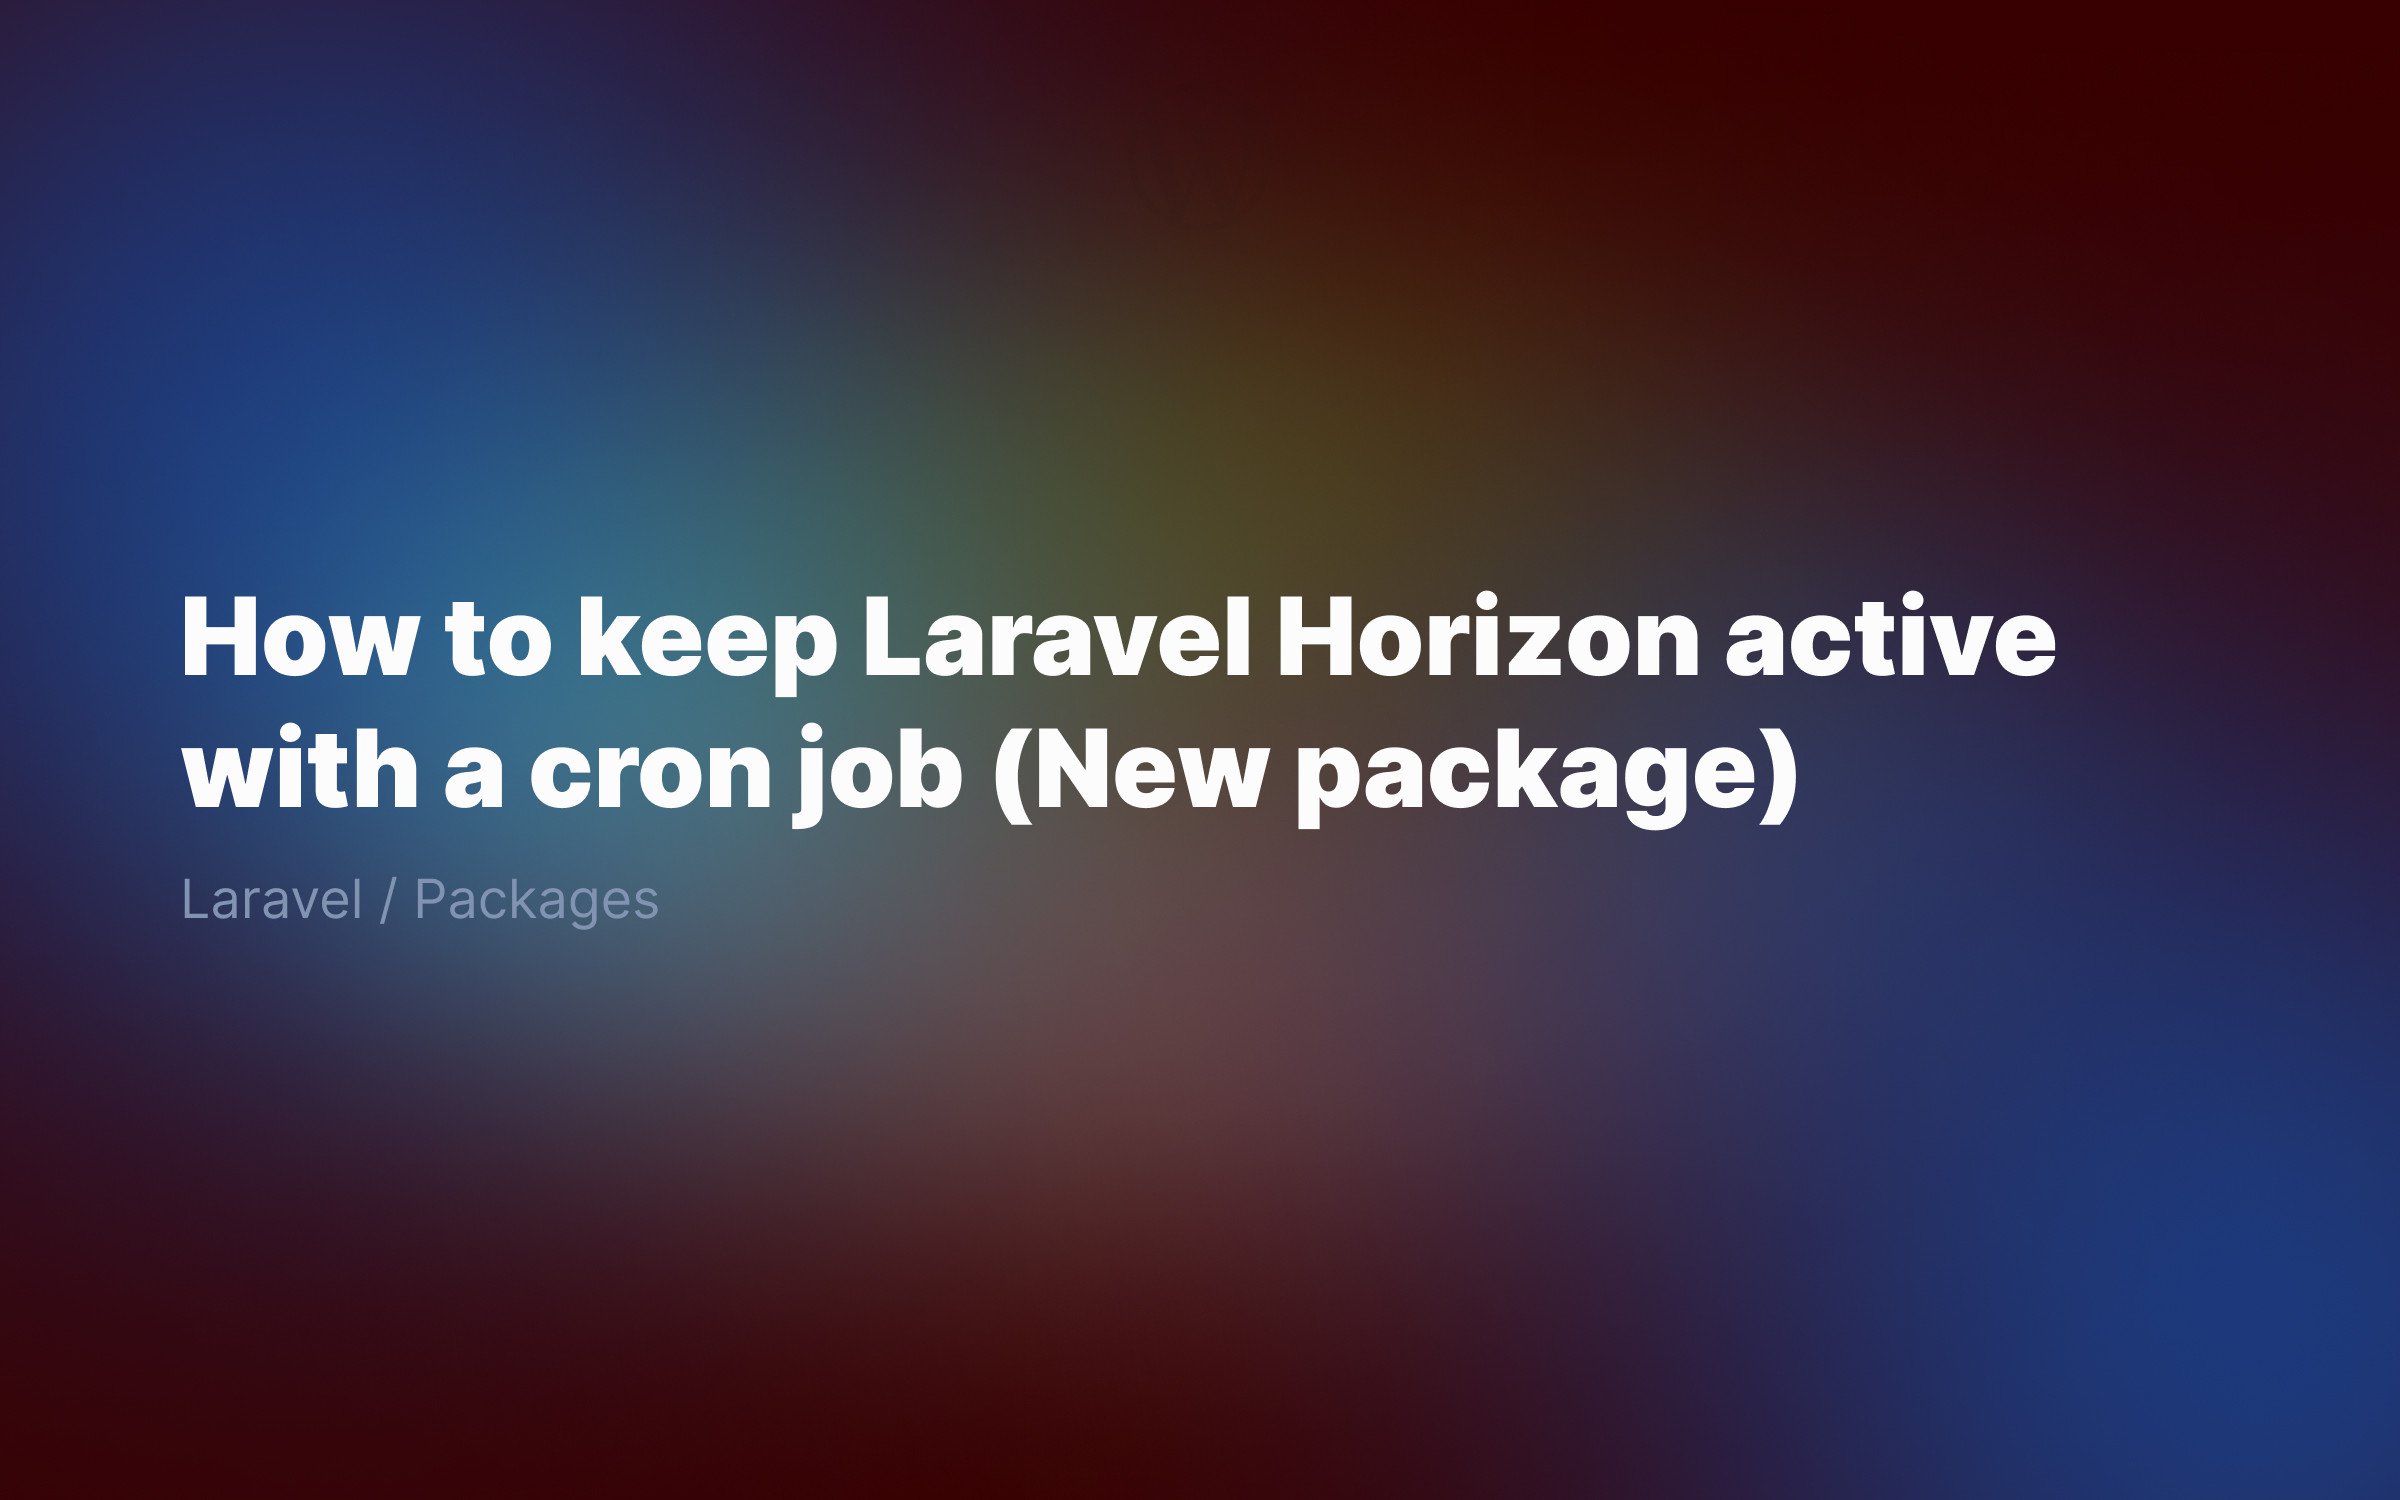 How to keep Laravel Horizon active with a cron job (New package)